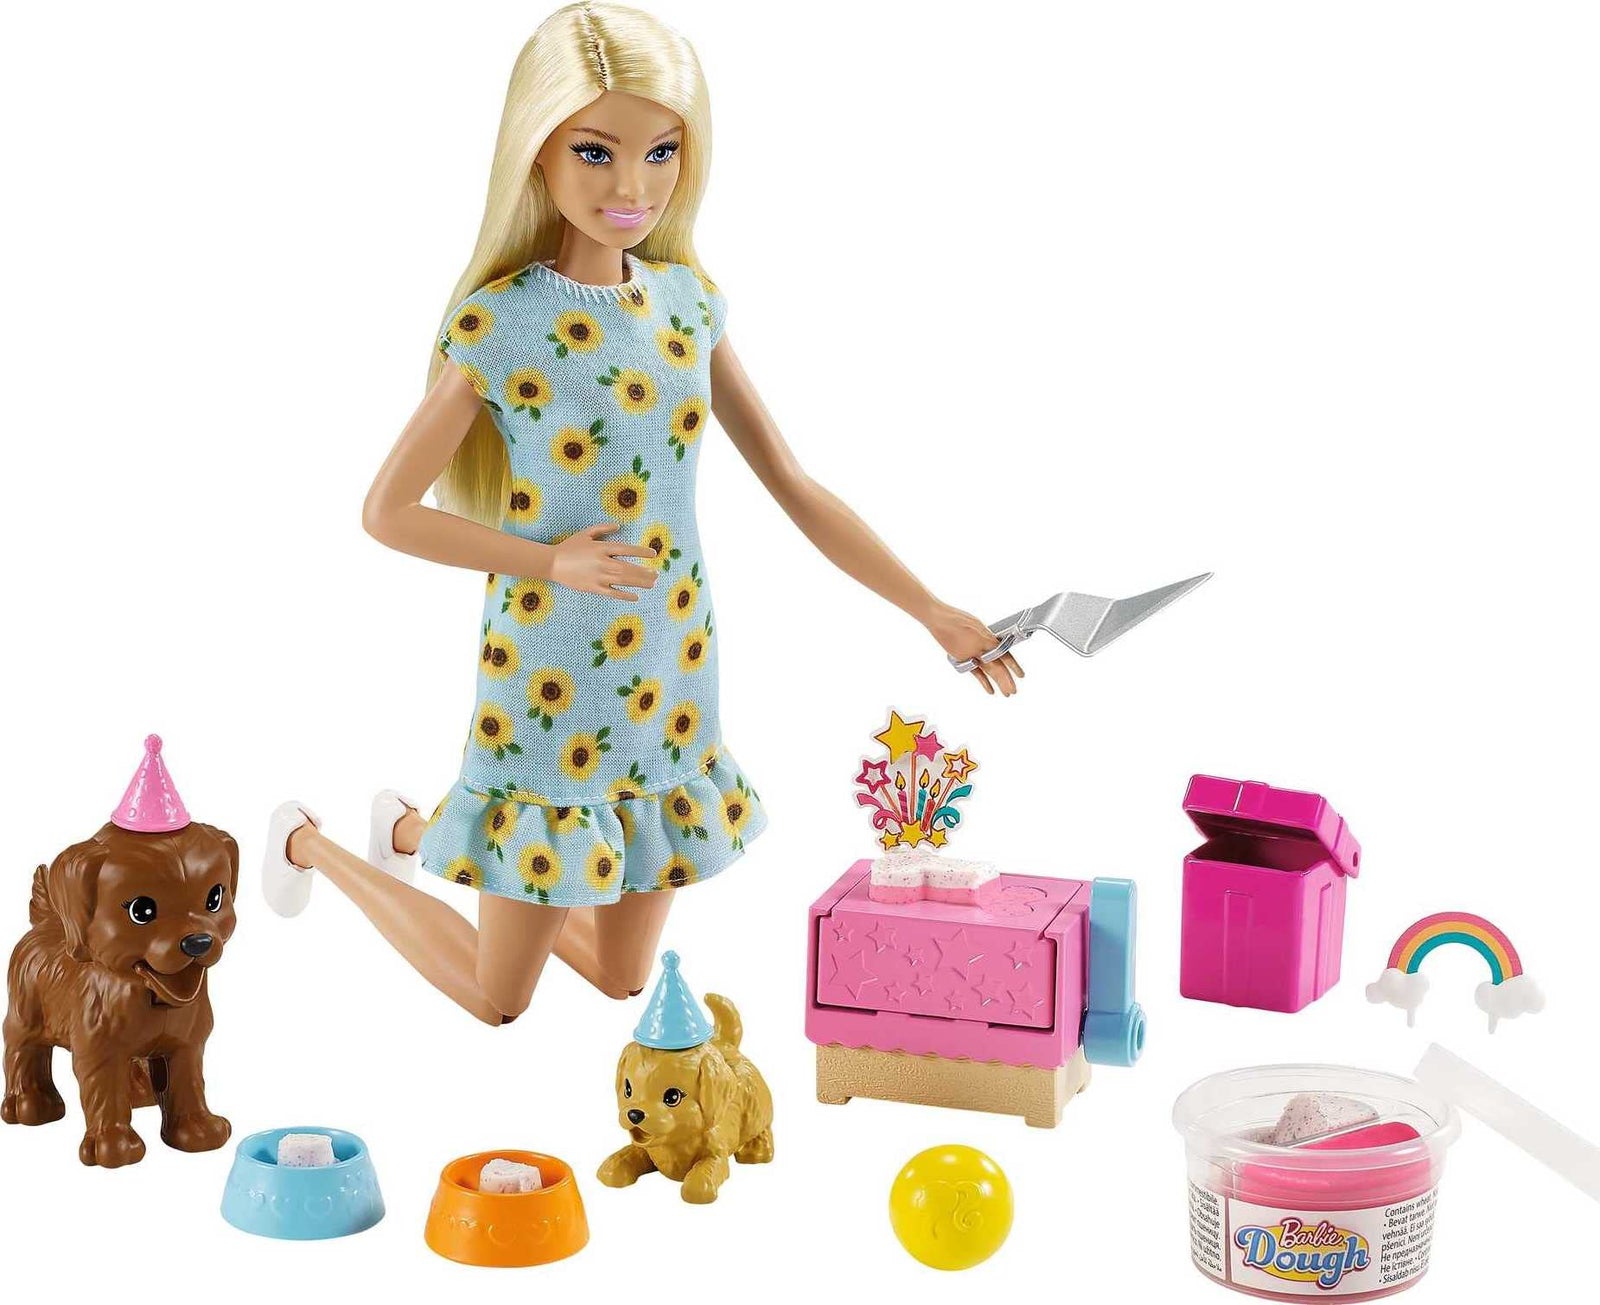 Barbie Doll (11.5-inch Blonde) and Puppy Party Playset with 2 Pet Puppies, Dough, Cake Mold and Accessories, Gift for 3 to 7 Year Olds